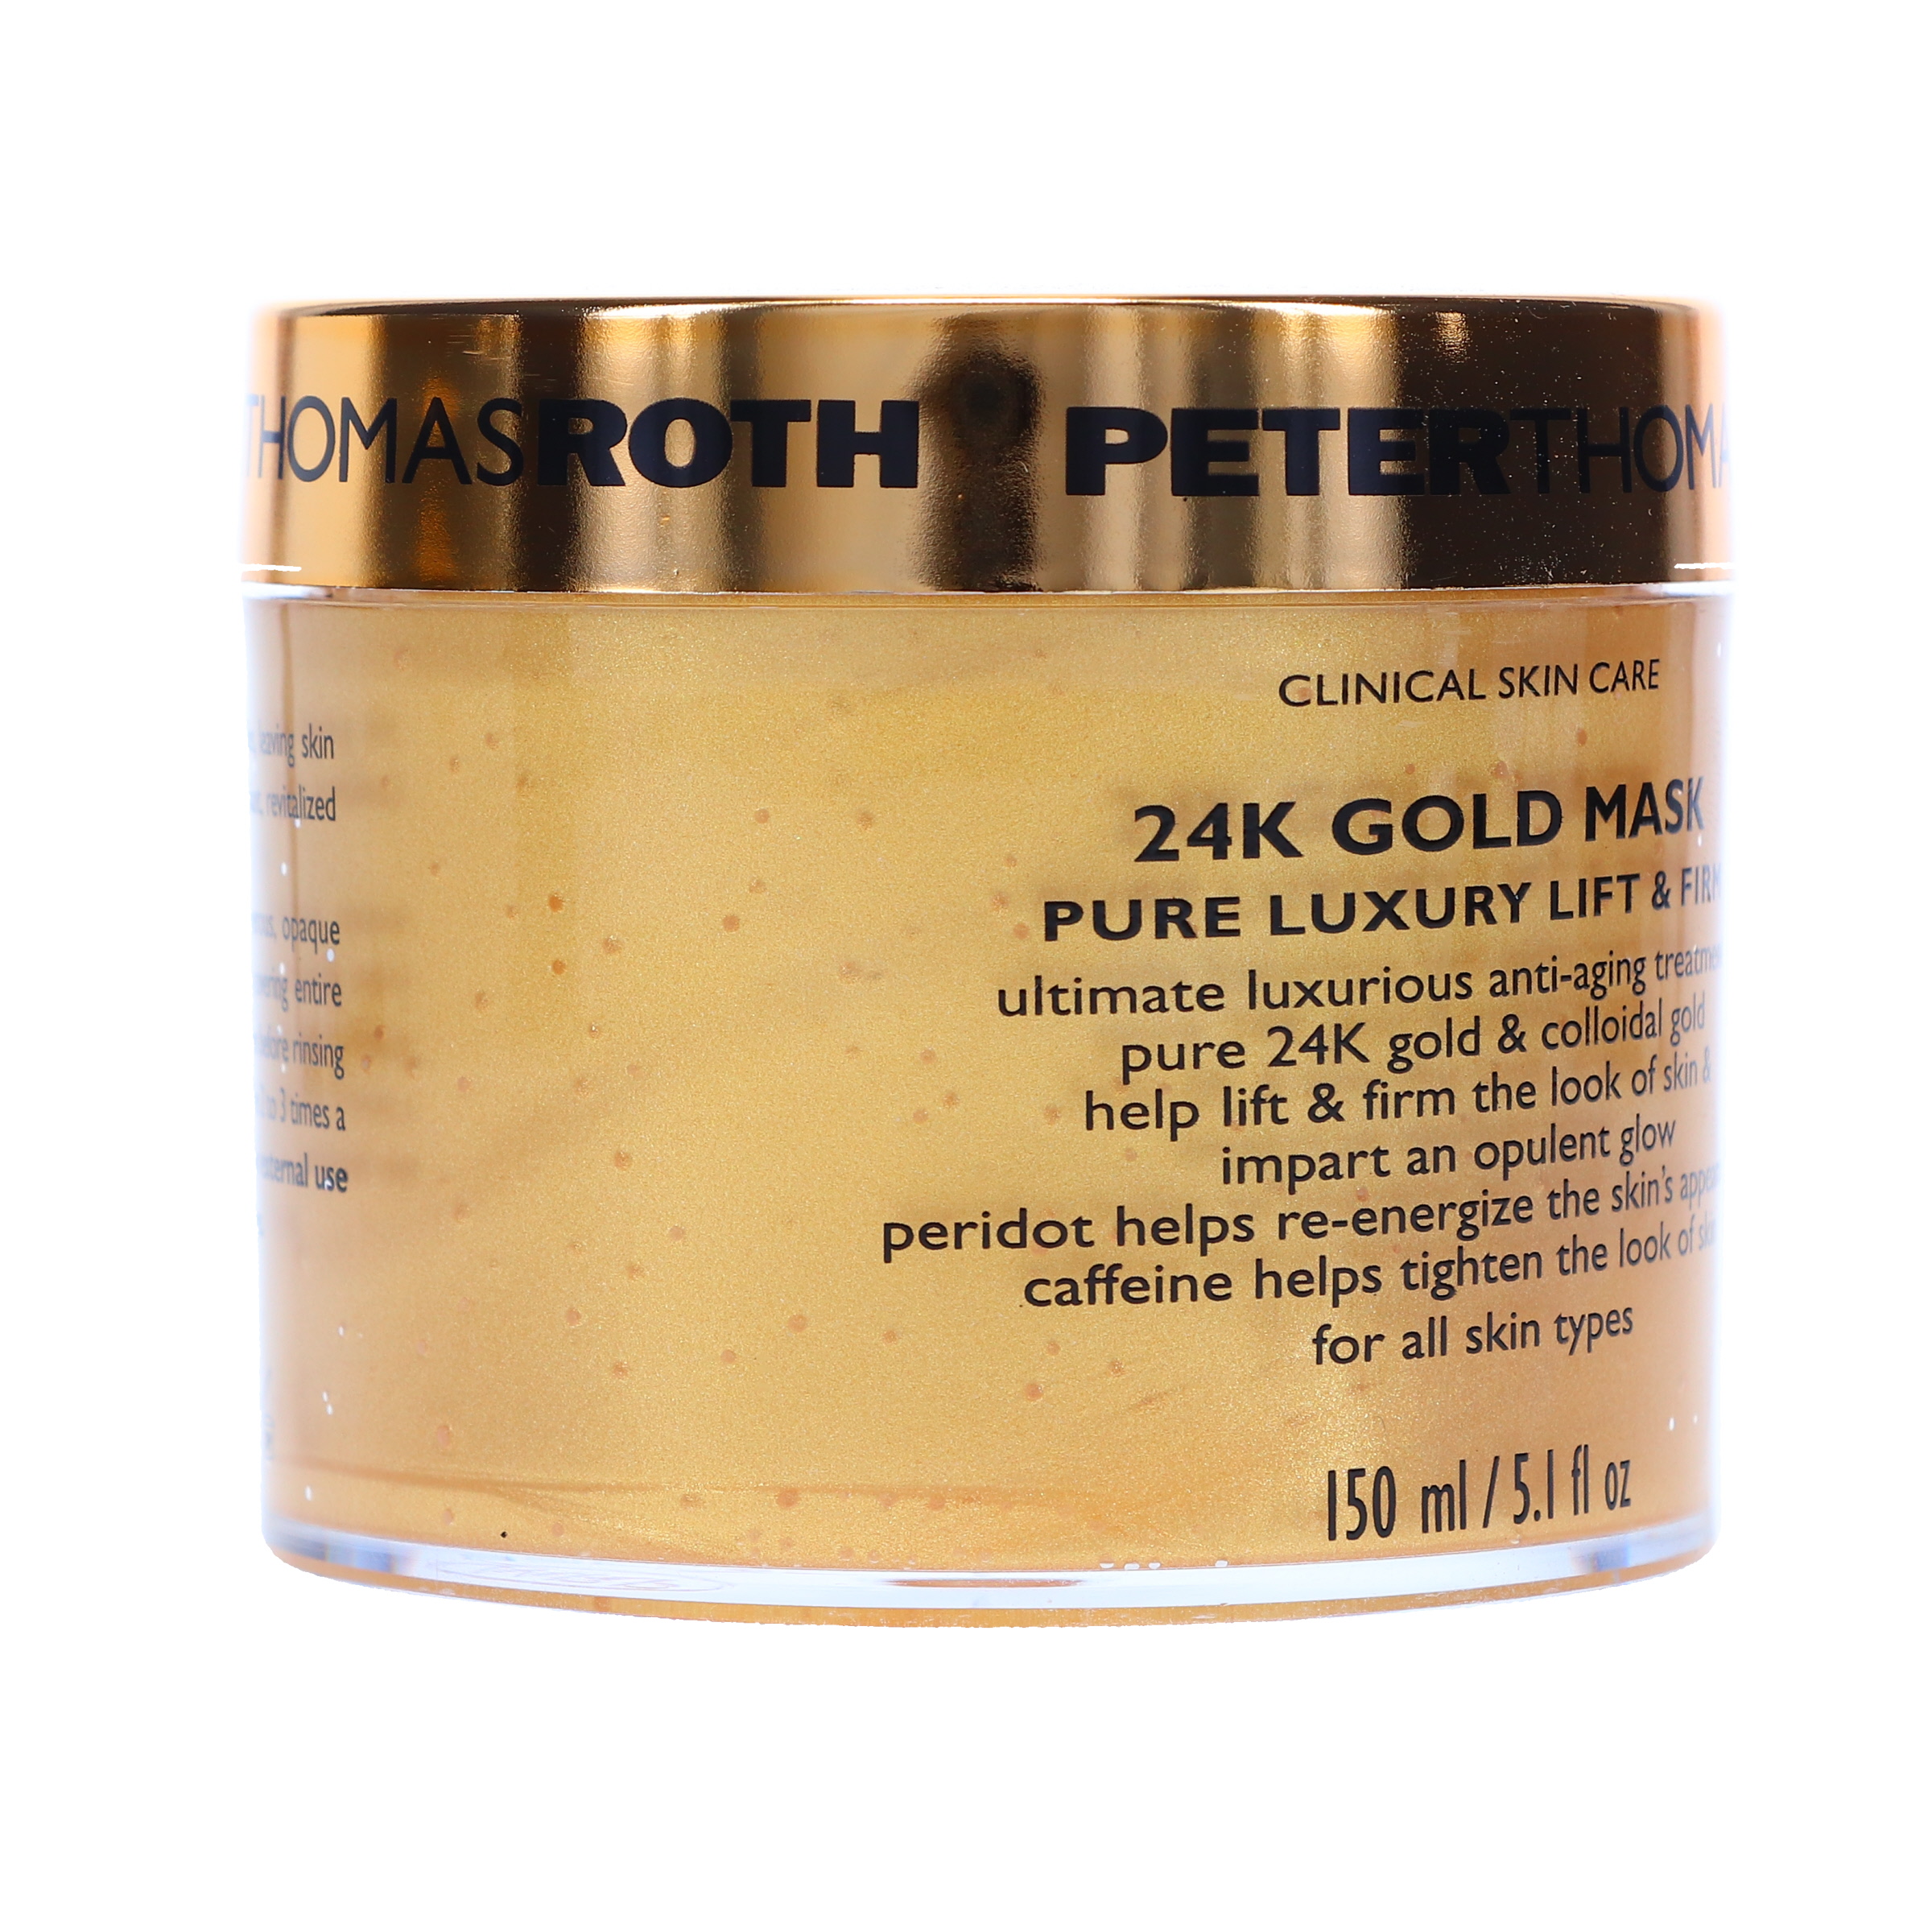 Peter Thomas Roth 24K Gold Mask Pure Luxury Lift & Firm Mask 5.1 oz - image 6 of 8